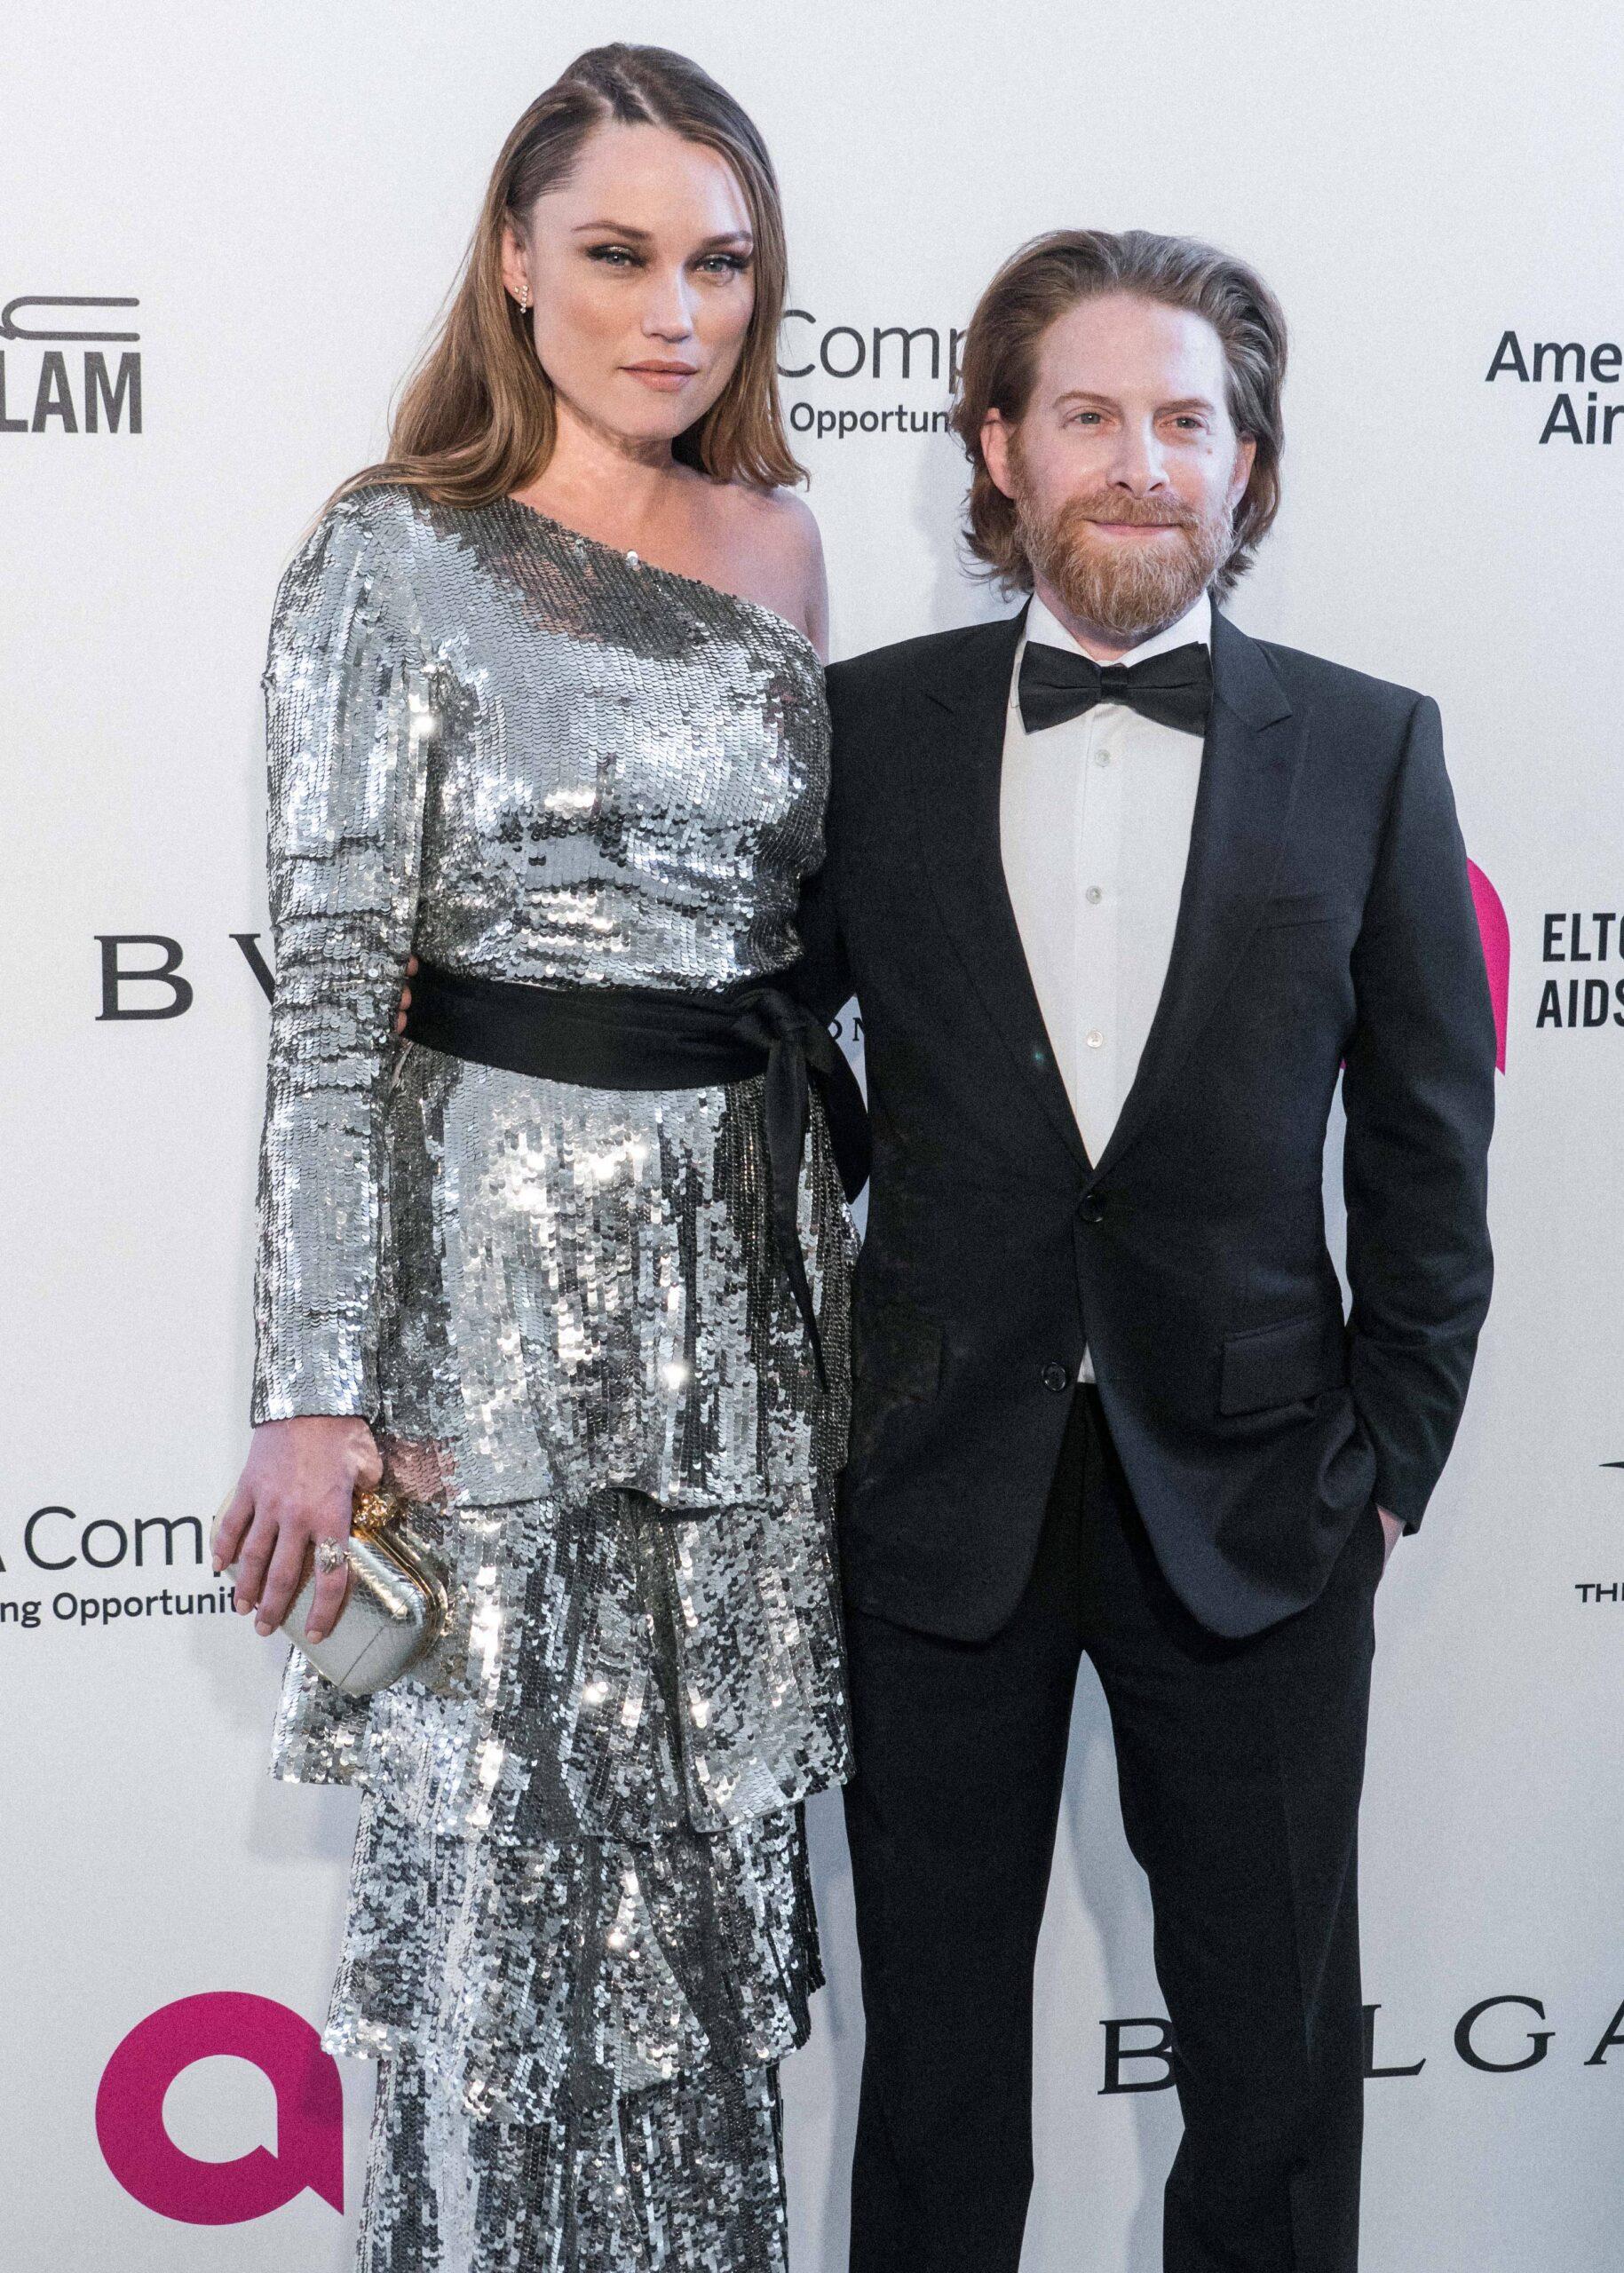 Seth Green & Wife Clare Grant attend the 26th Annual Elton John AIDS Foundation's Academy Awards Viewing Party